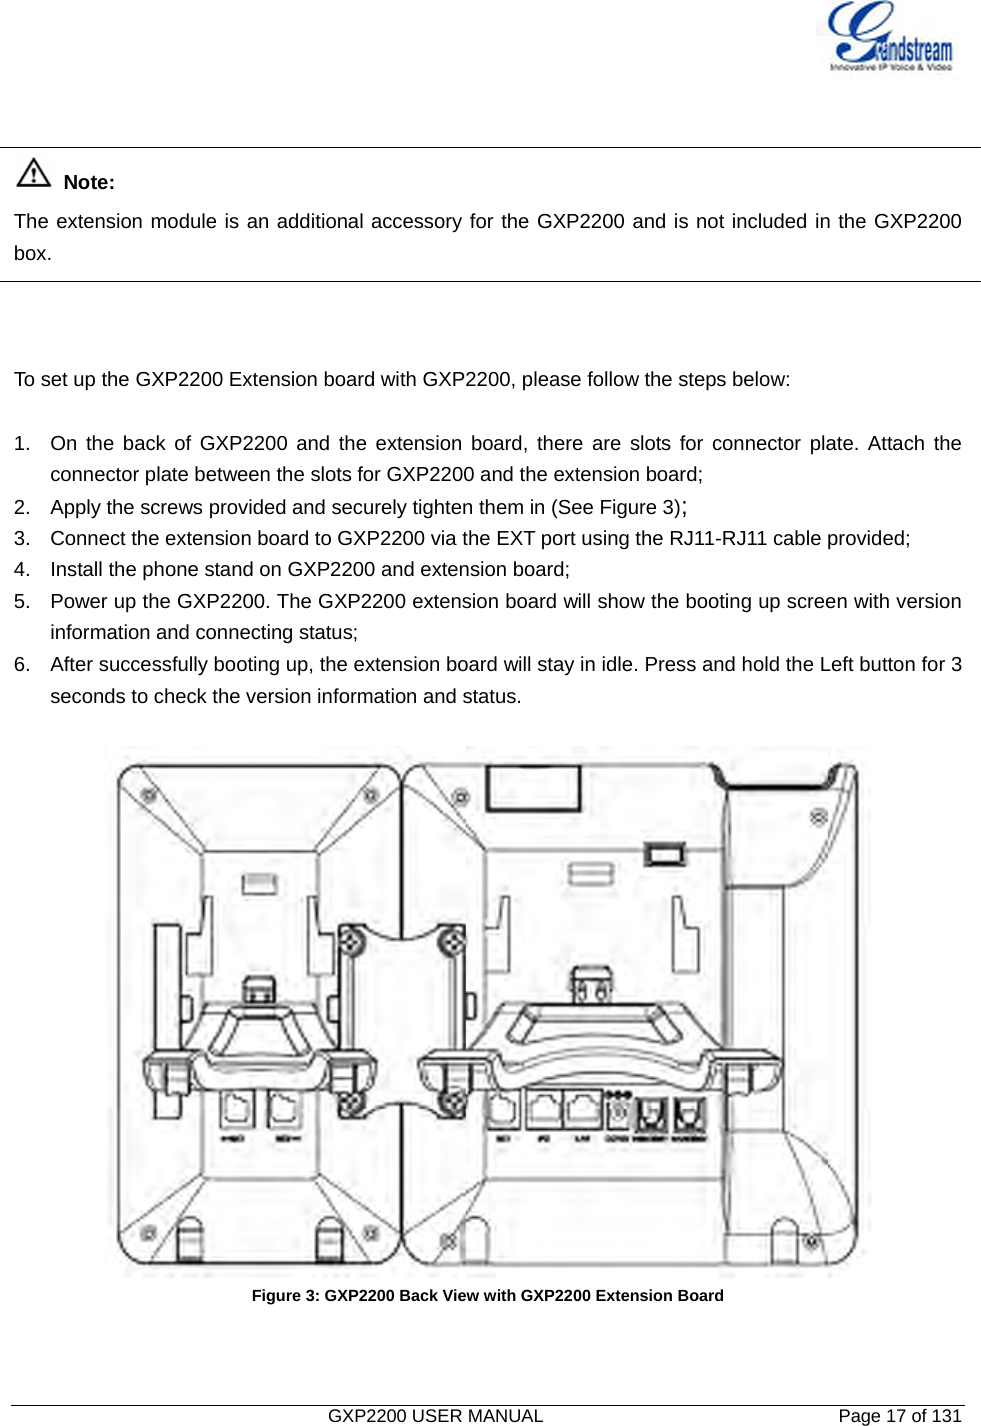   GXP2200 USER MANUAL       Page 17 of 131                                     Note:  The extension module is an additional accessory for the GXP2200 and is not included in the GXP2200 box.    To set up the GXP2200 Extension board with GXP2200, please follow the steps below:  1.  On the back of GXP2200 and the extension board, there are slots for connector plate. Attach the connector plate between the slots for GXP2200 and the extension board; 2.  Apply the screws provided and securely tighten them in (See Figure 3); 3.  Connect the extension board to GXP2200 via the EXT port using the RJ11-RJ11 cable provided; 4.  Install the phone stand on GXP2200 and extension board; 5.  Power up the GXP2200. The GXP2200 extension board will show the booting up screen with version information and connecting status; 6.  After successfully booting up, the extension board will stay in idle. Press and hold the Left button for 3 seconds to check the version information and status.   Figure 3: GXP2200 Back View with GXP2200 Extension Board   